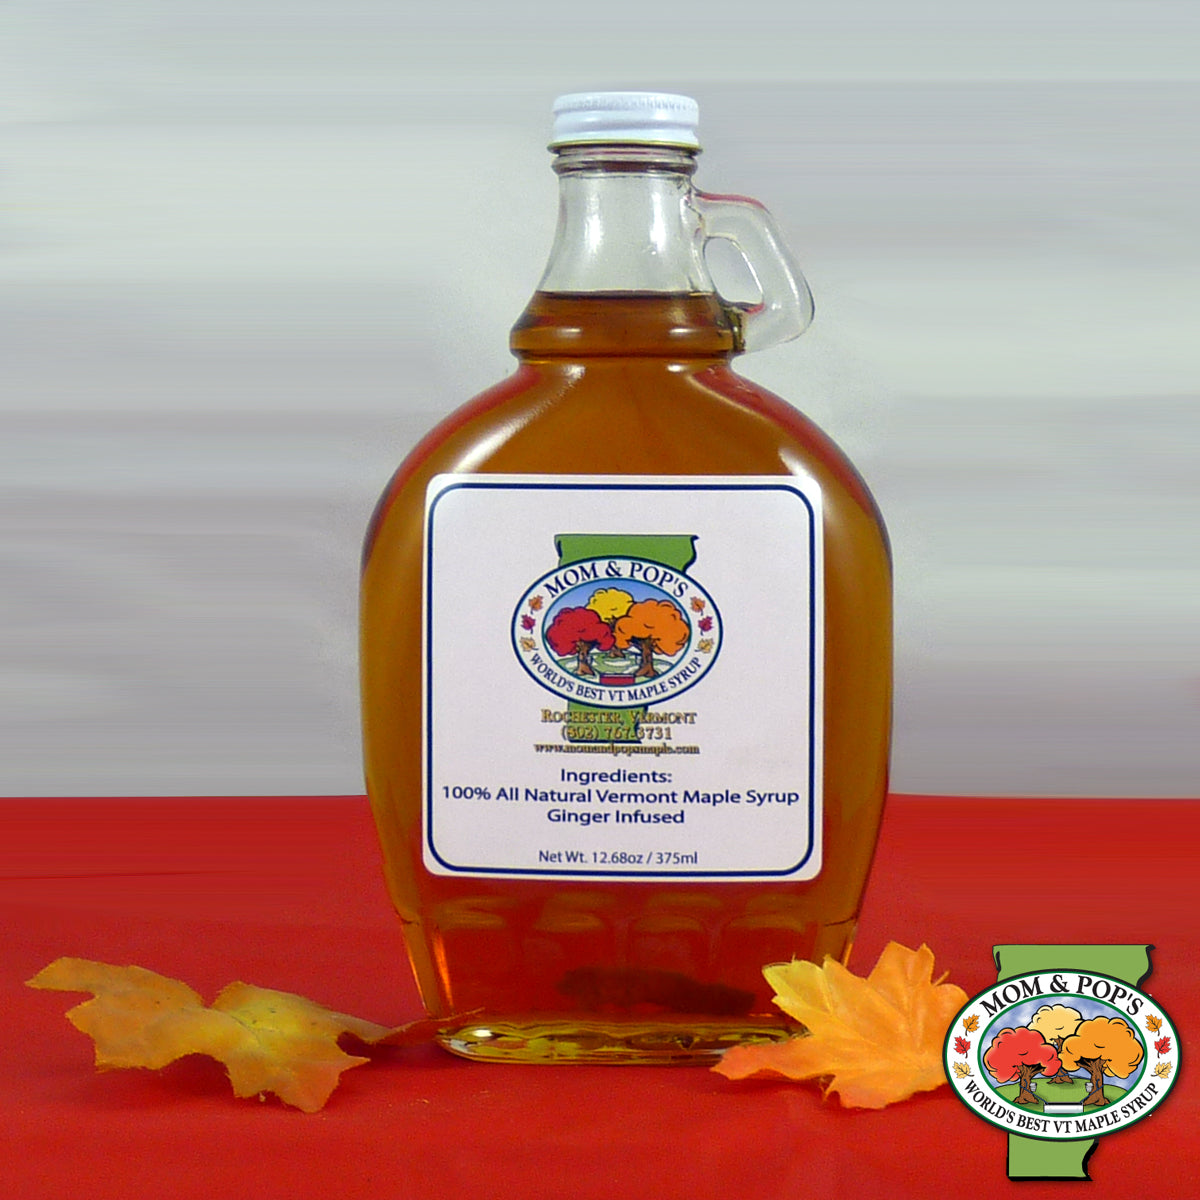 A bottle of Ginger Infused Maple Syrup